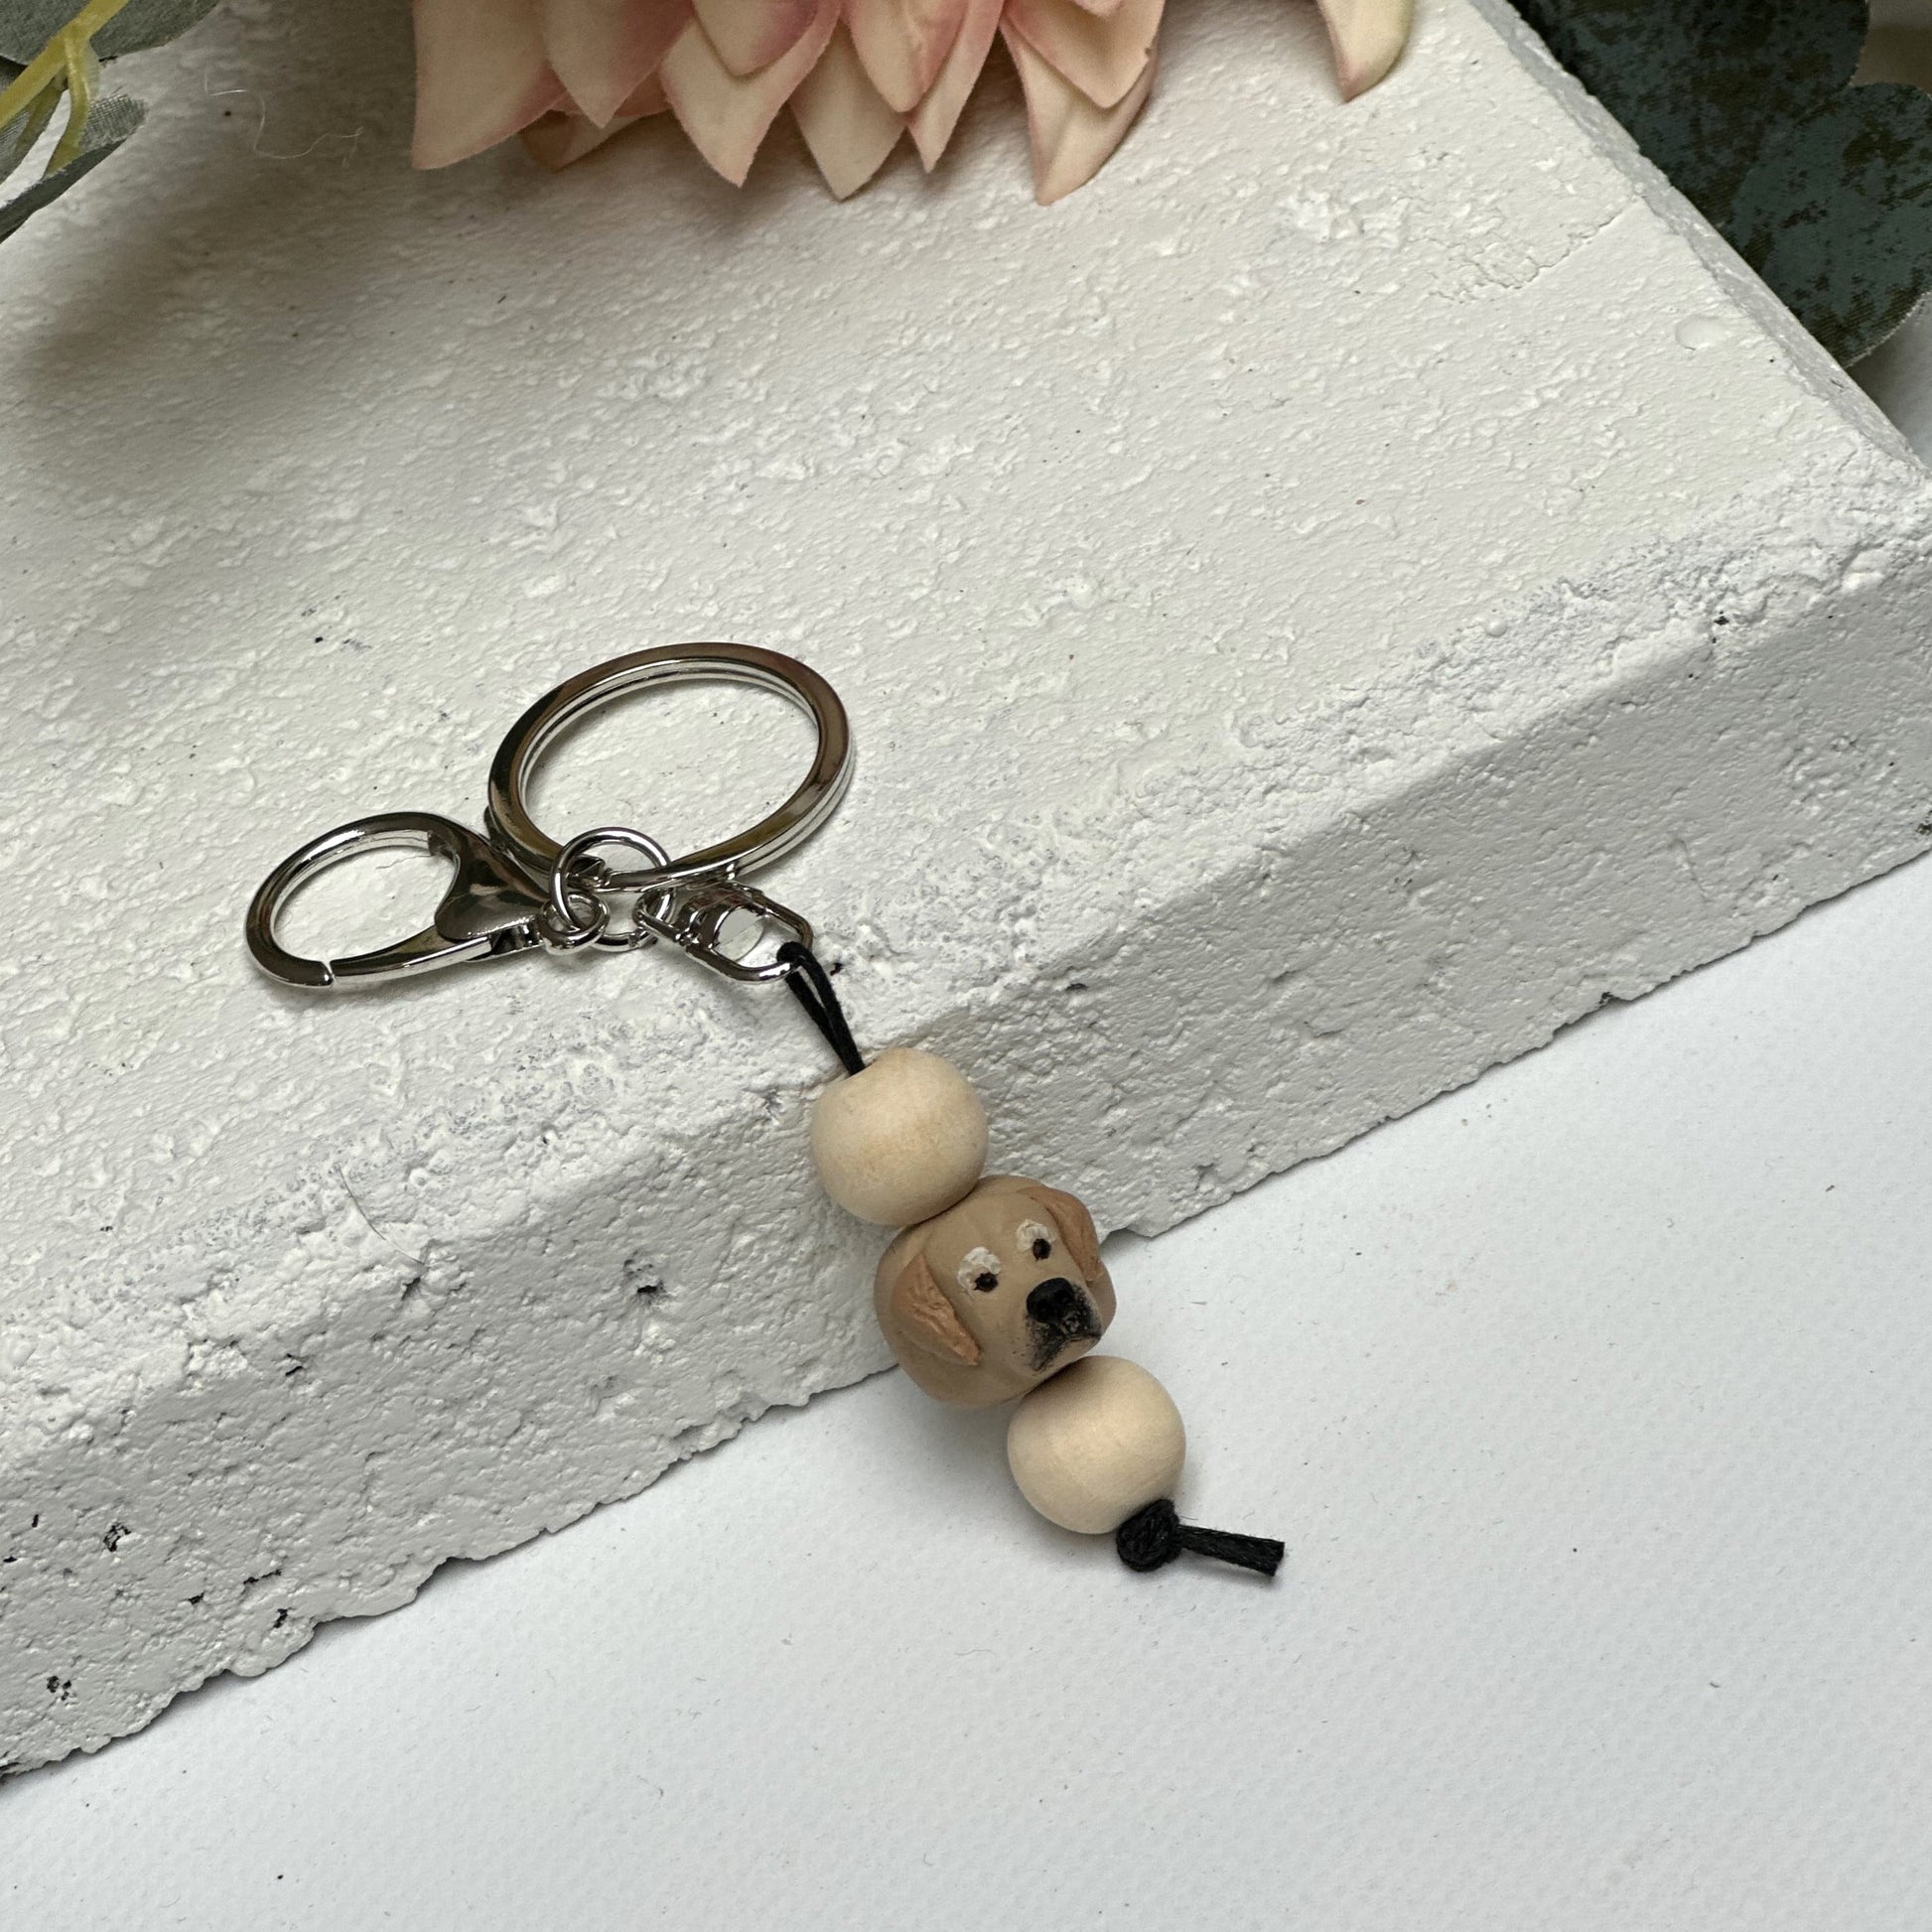 Handmade golden retriever dog polymer clay and timber keying on white textured background with a pink flower in the background